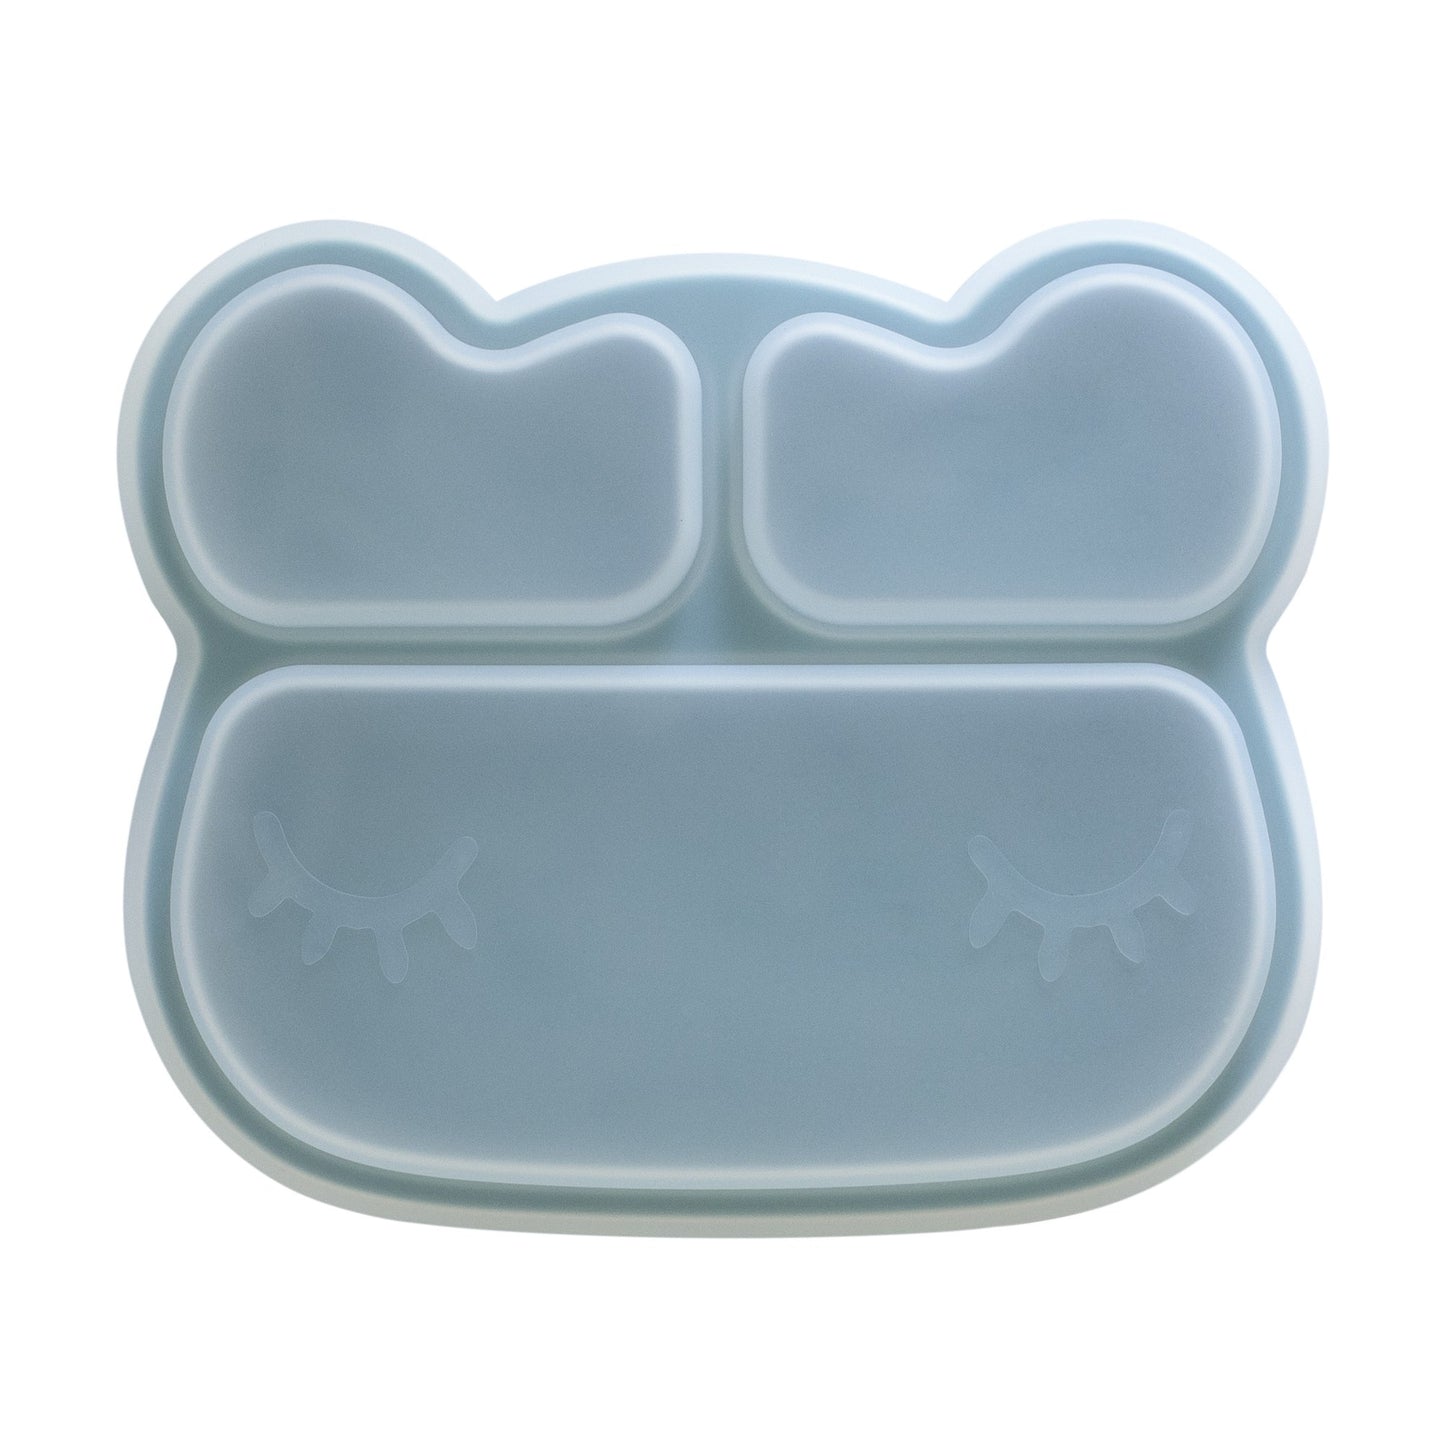 Bear Stickie Plate Lid - Little Reef and Friends